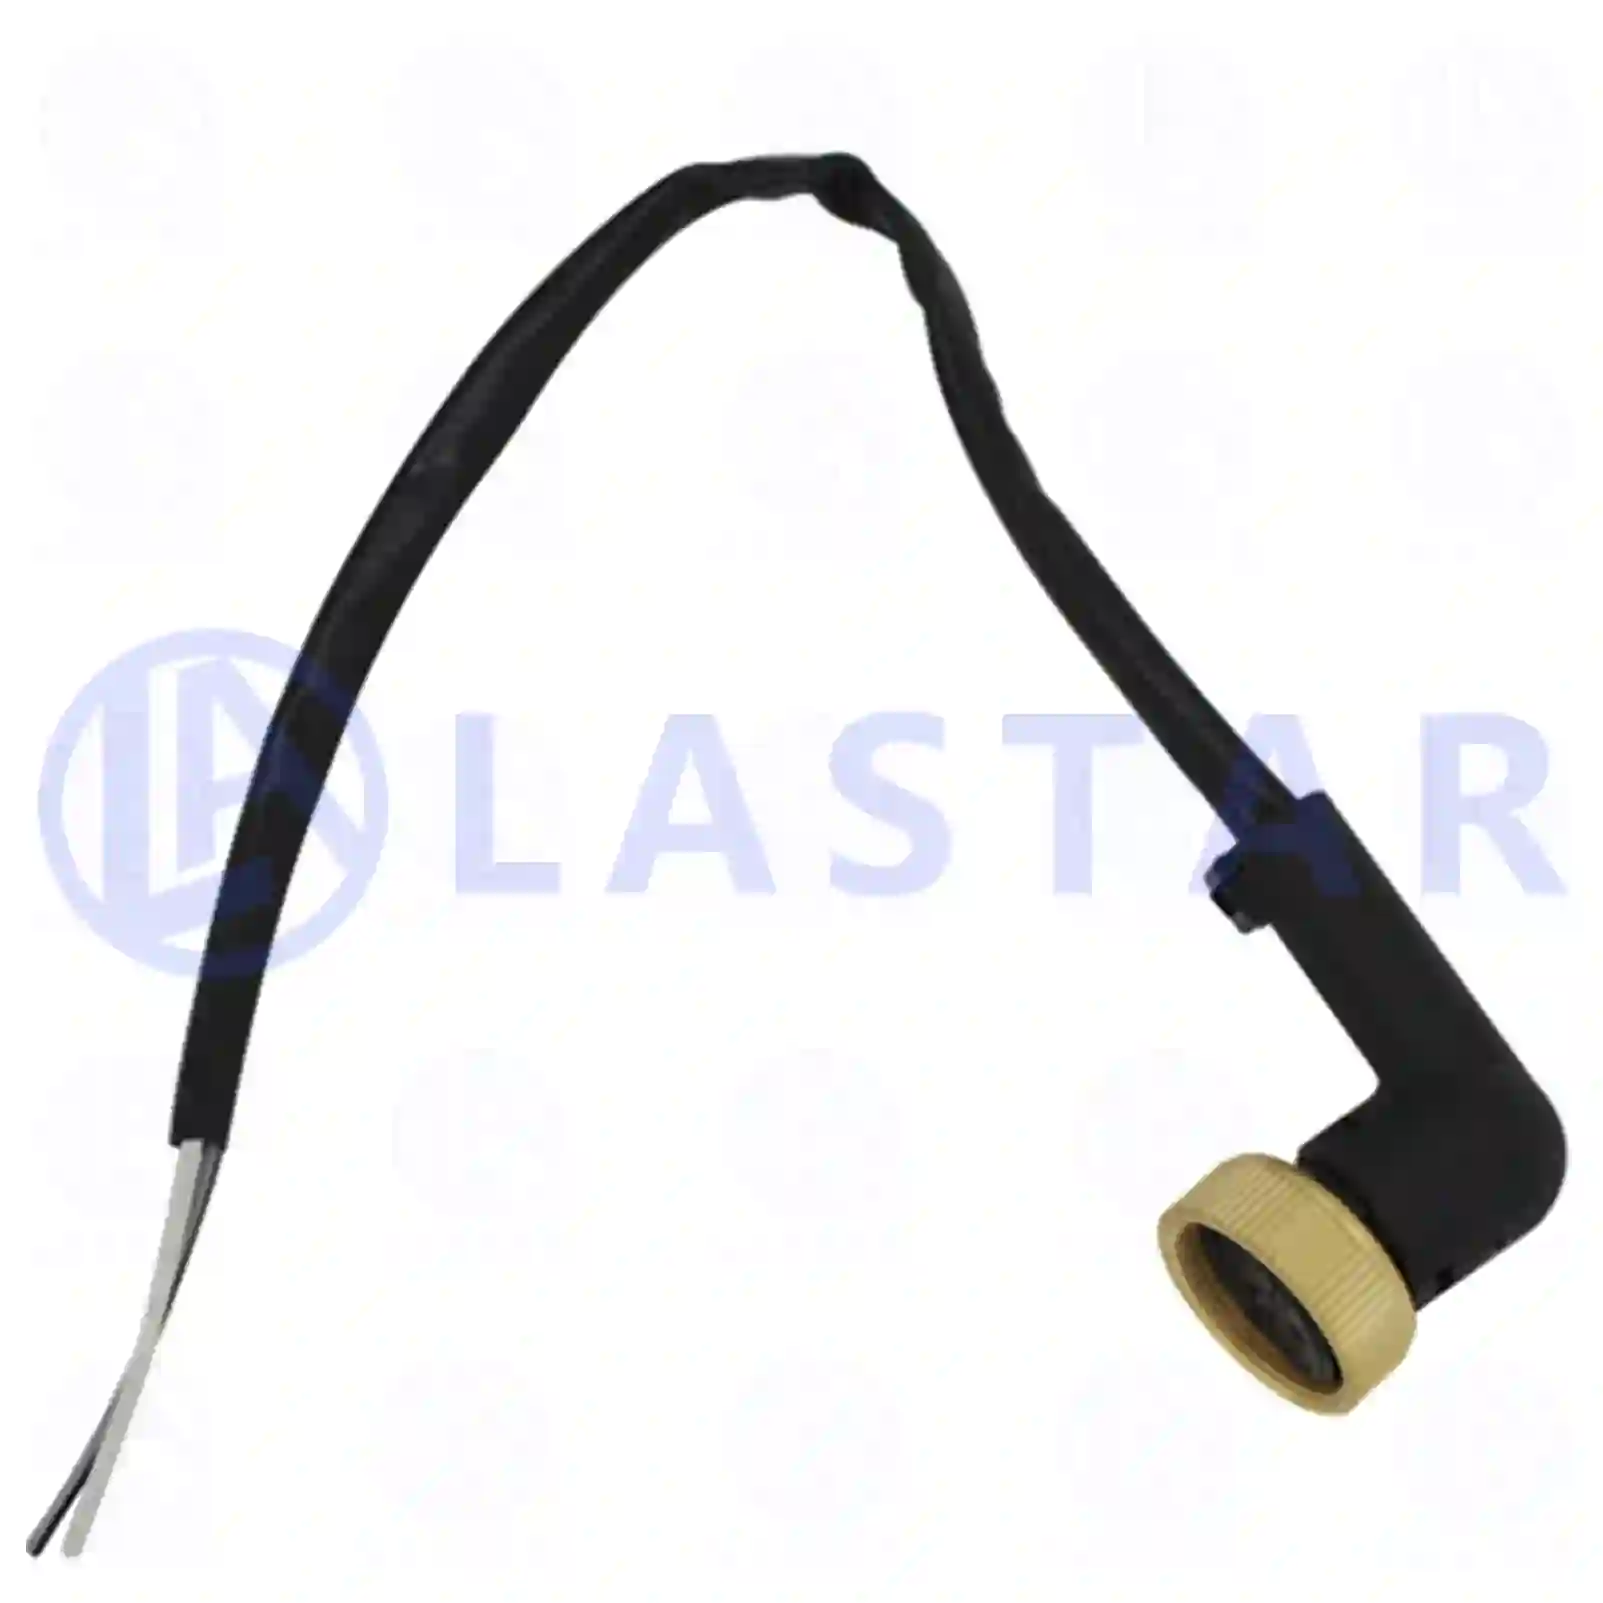 Connector cable, 77725183, 3805402181, 1378883, ZG20365-0008 ||  77725183 Lastar Spare Part | Truck Spare Parts, Auotomotive Spare Parts Connector cable, 77725183, 3805402181, 1378883, ZG20365-0008 ||  77725183 Lastar Spare Part | Truck Spare Parts, Auotomotive Spare Parts